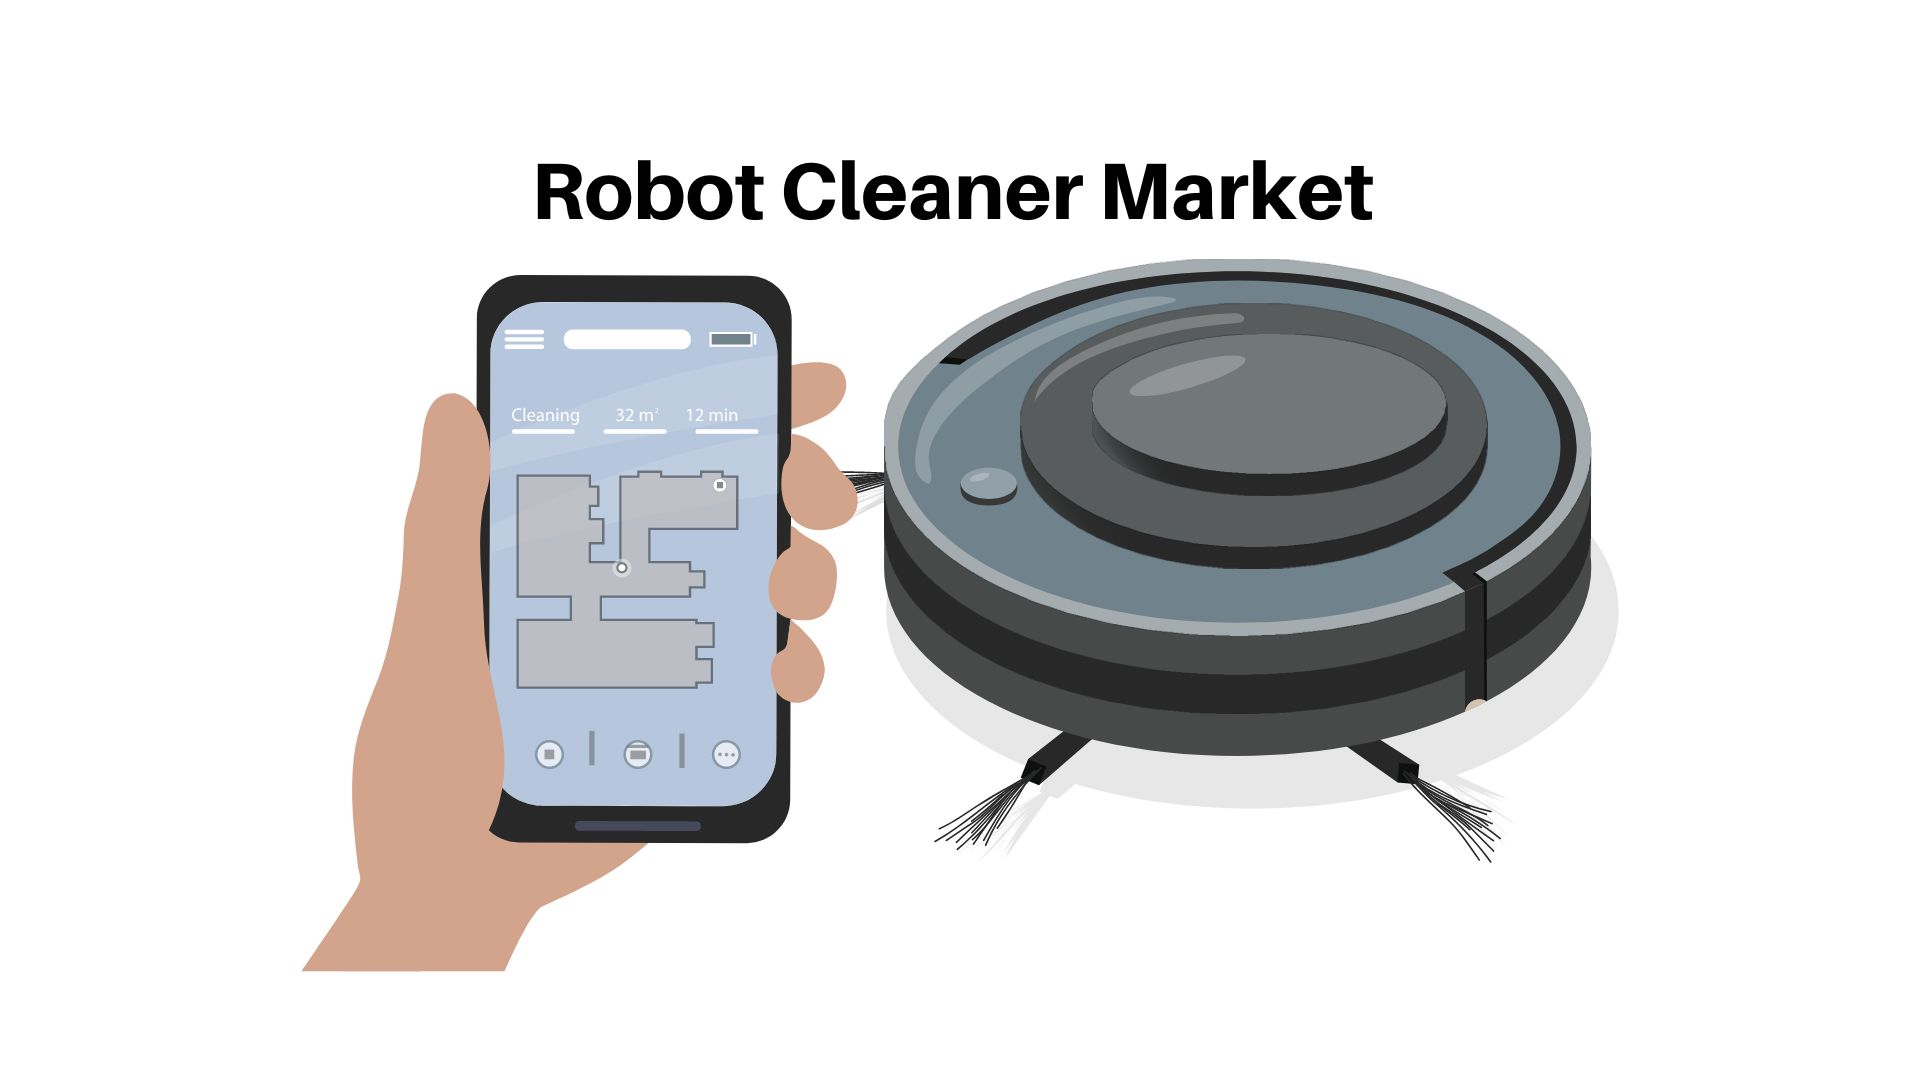 12.84% CAGR for Robot Cleaner Market to Gain USD 15.19 billion by 2033